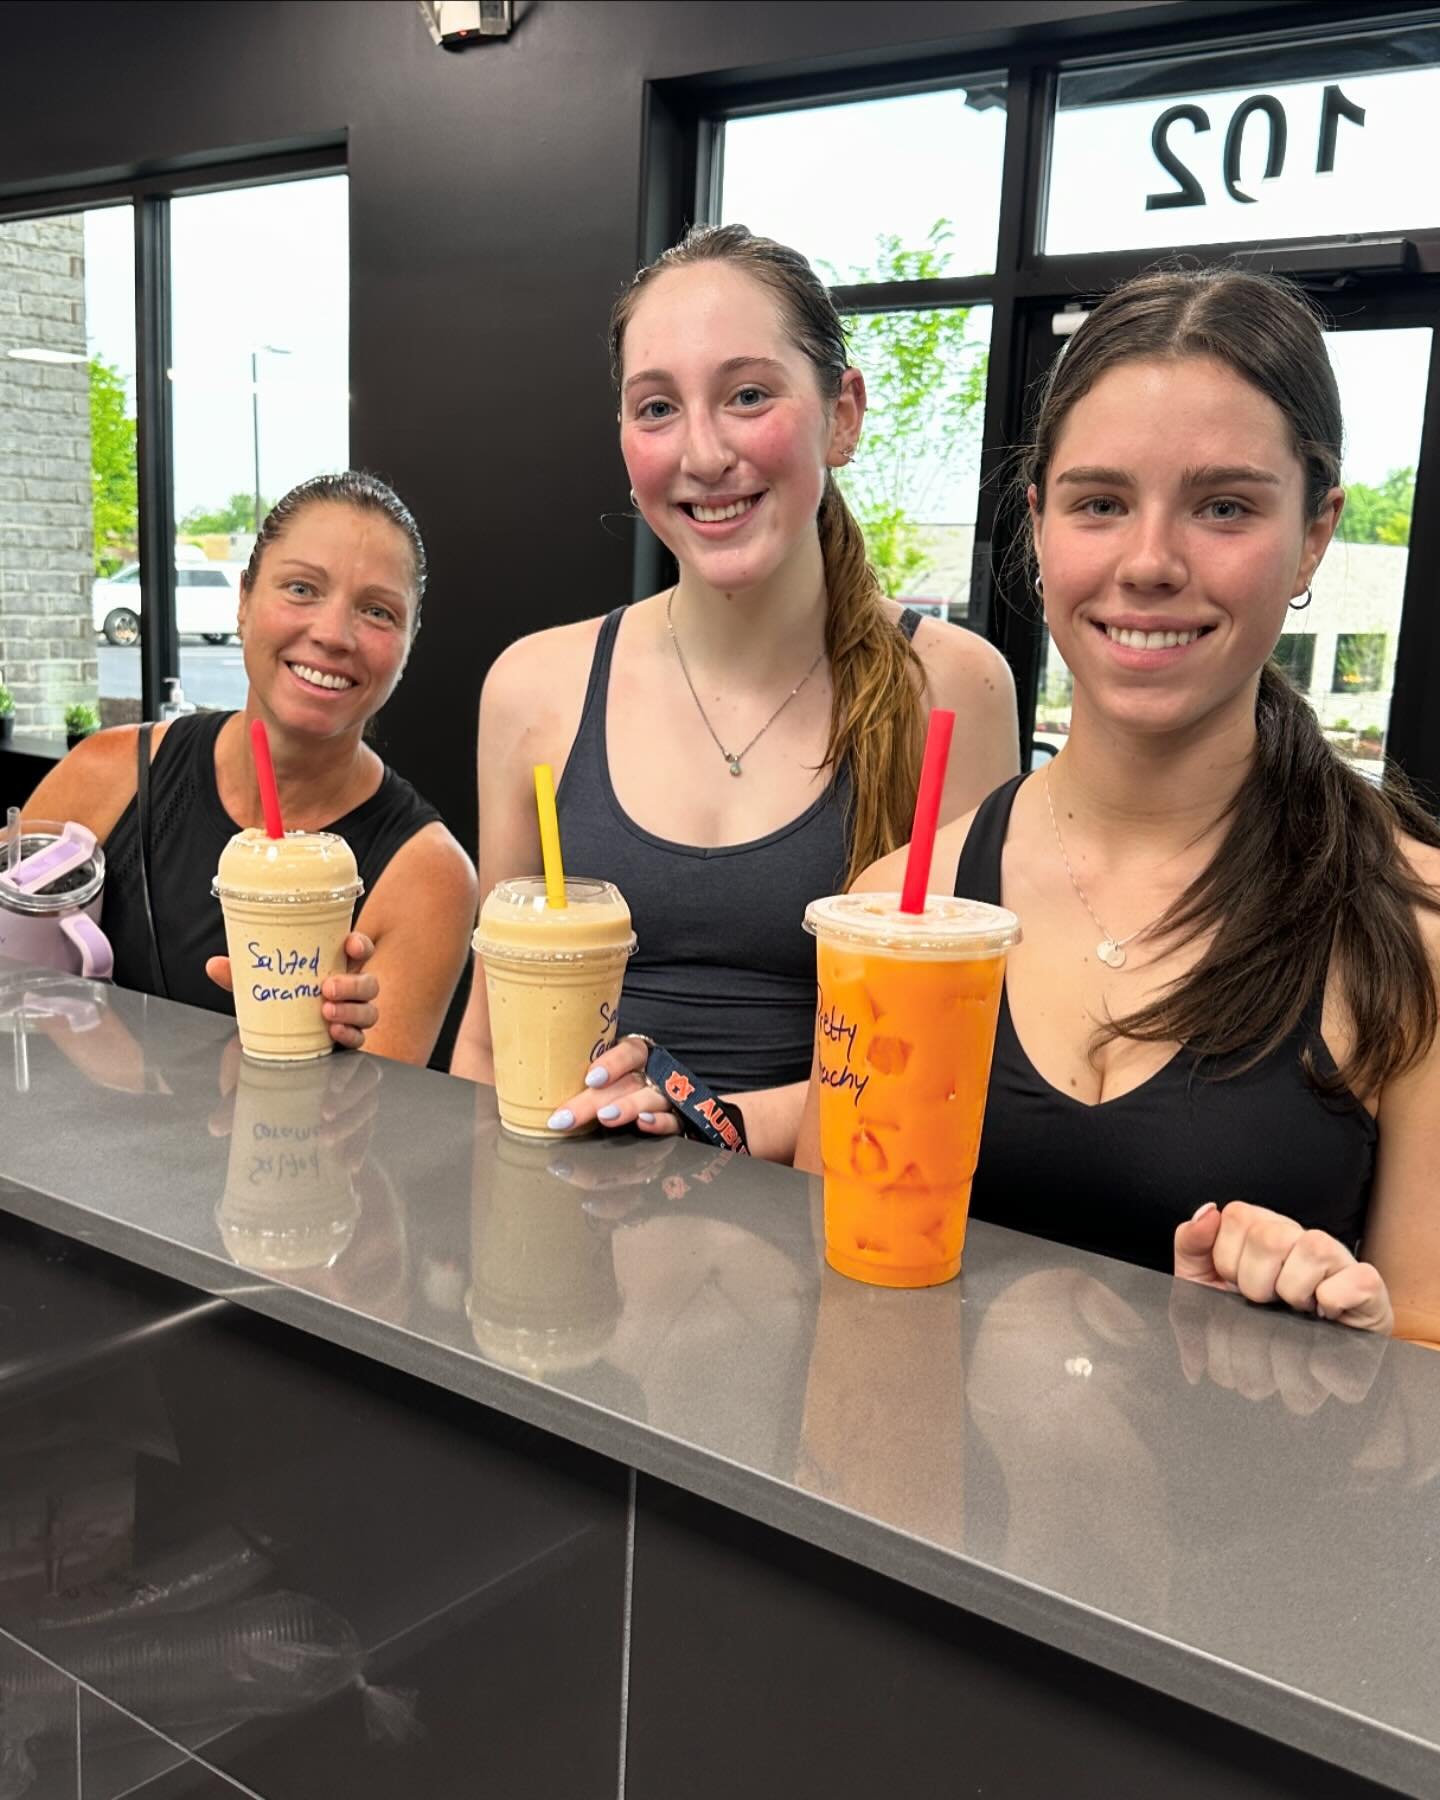 🎉 Happy Tuesday🎊 Our community loves to Xperience More Nutrition!

🧋Healthy and Delicious Meal replacement shakes paired with one of our many Loaded Energy Beverages🥤

🔥BEST COMBO IN TOWN🔥

 ⏰Monday-Thursday 6am-6pm
  Friday 6am-3pm
  Saturday 